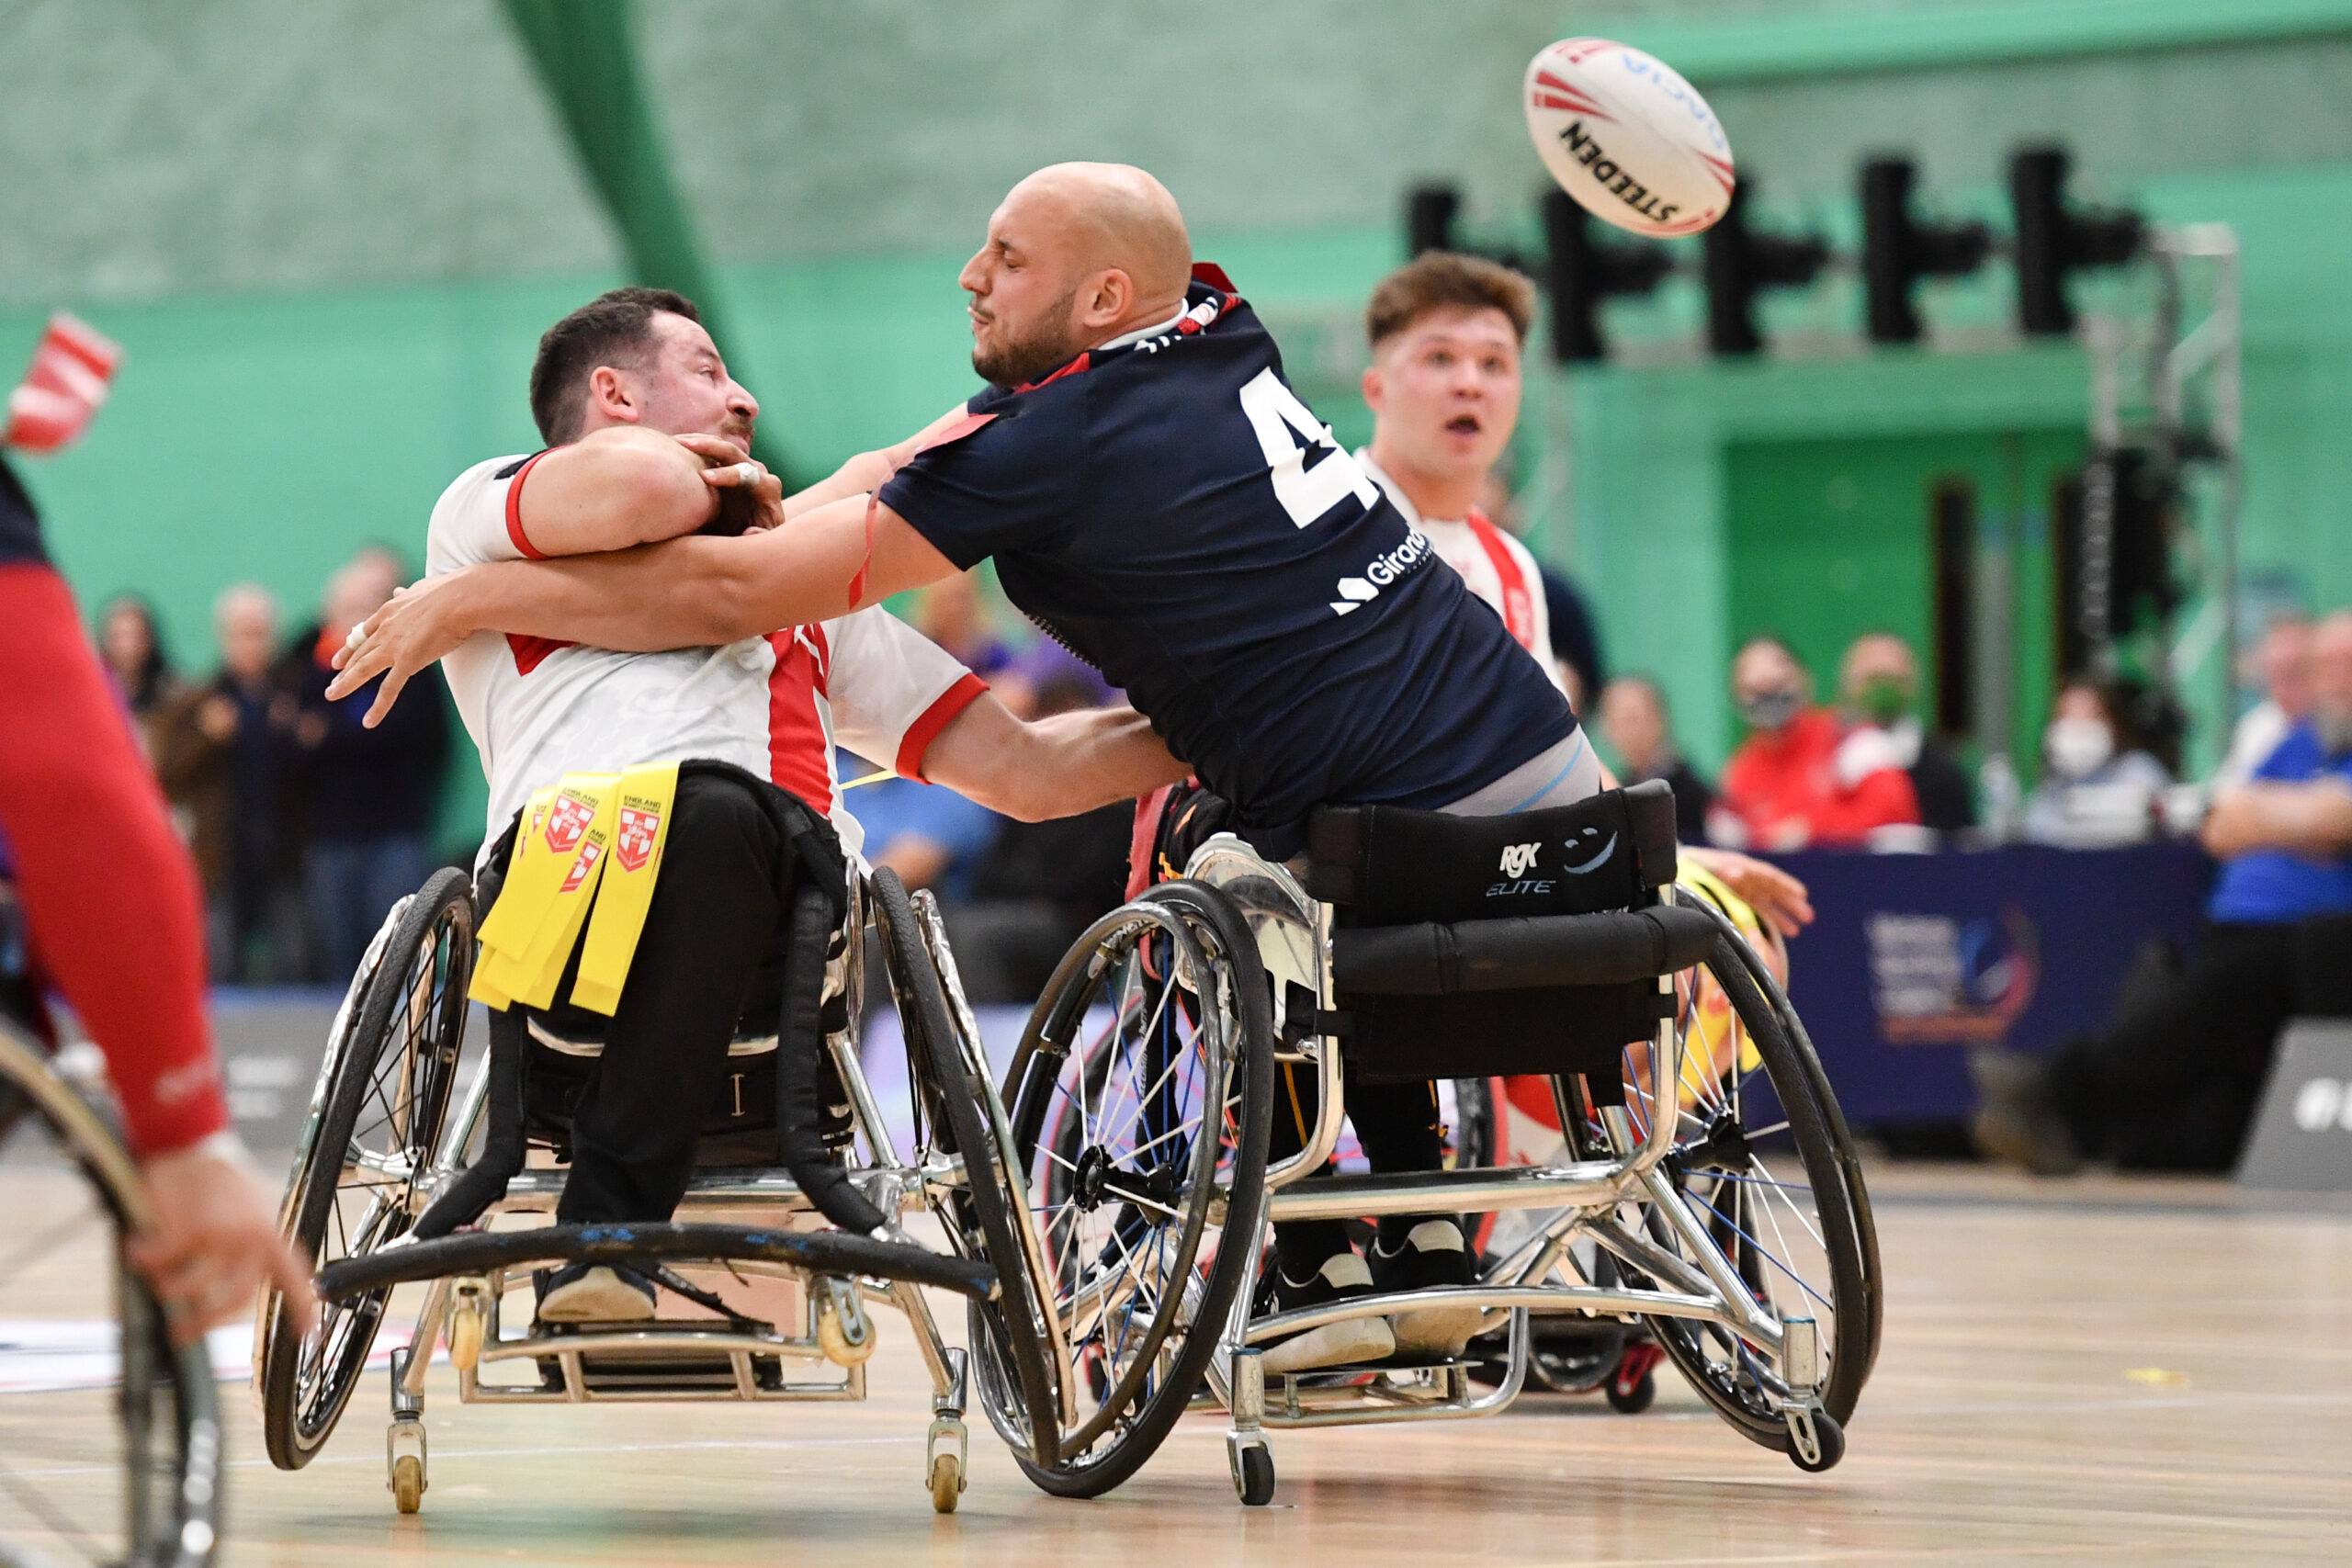 Picture by Will Palmer/SWpix.com – 10/11/2021 – Rugby League – Wheelchair International – England v France – Medway Park Sports Centre, Gillingham, England – Sebastien Bechara of England passes the ball out of the tackle of Jérémy Bourson of France